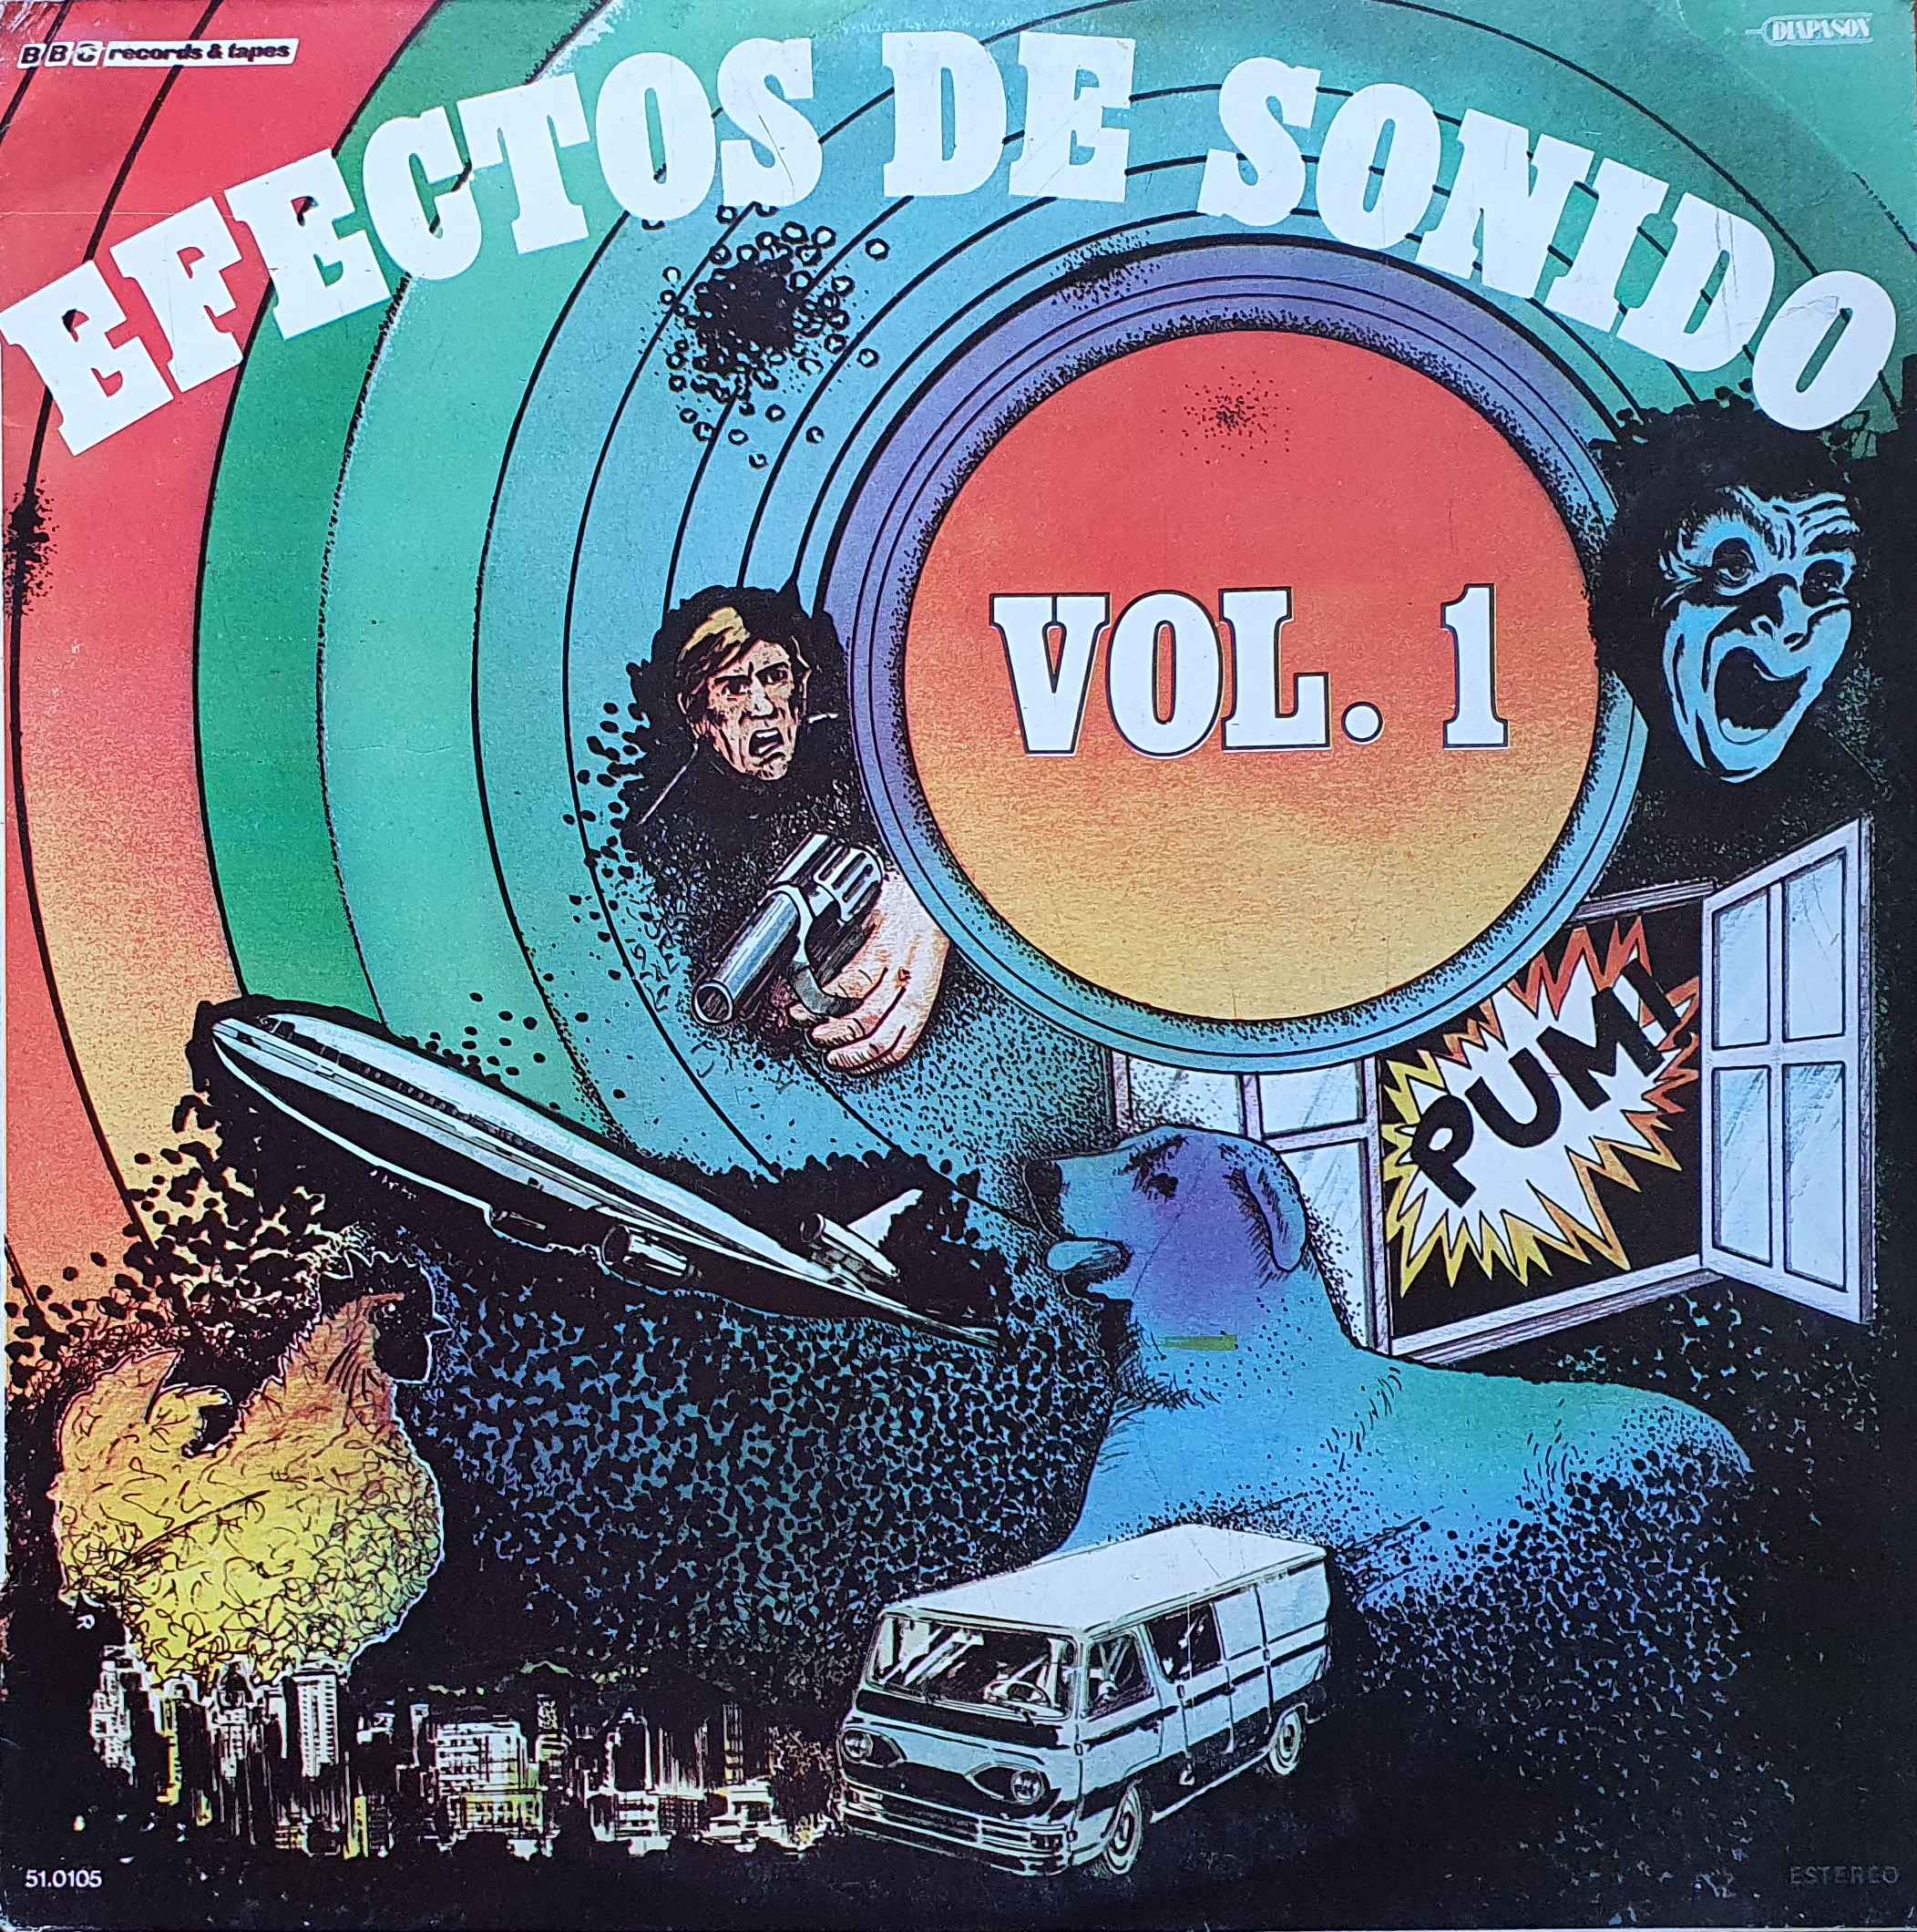 Picture of Efectos de sonido No 1 by artist Various from the BBC albums - Records and Tapes library